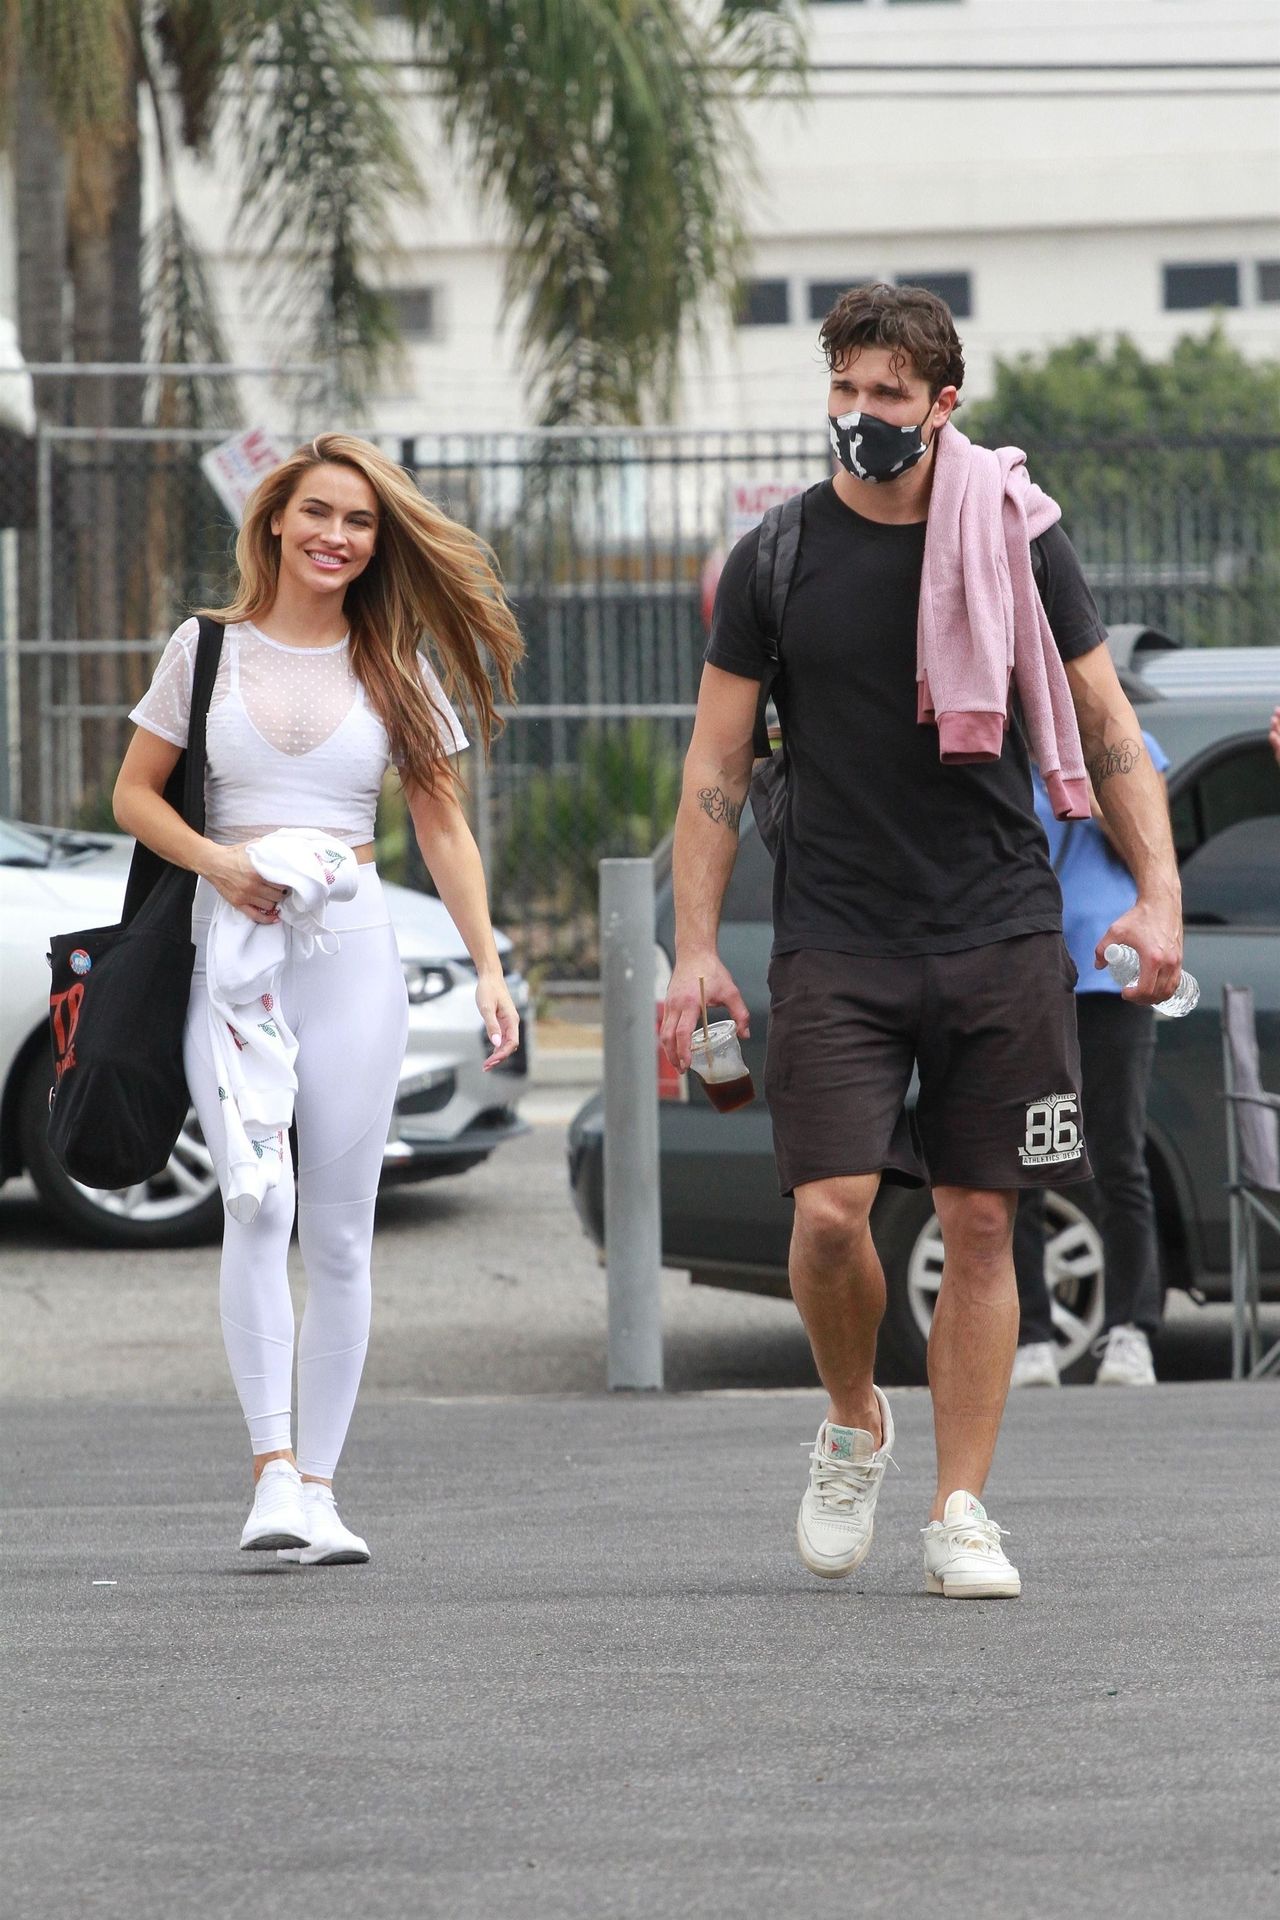 Chrishell Stause is All Smiles as She Finishes Her Saturday Practice (76 Photos)